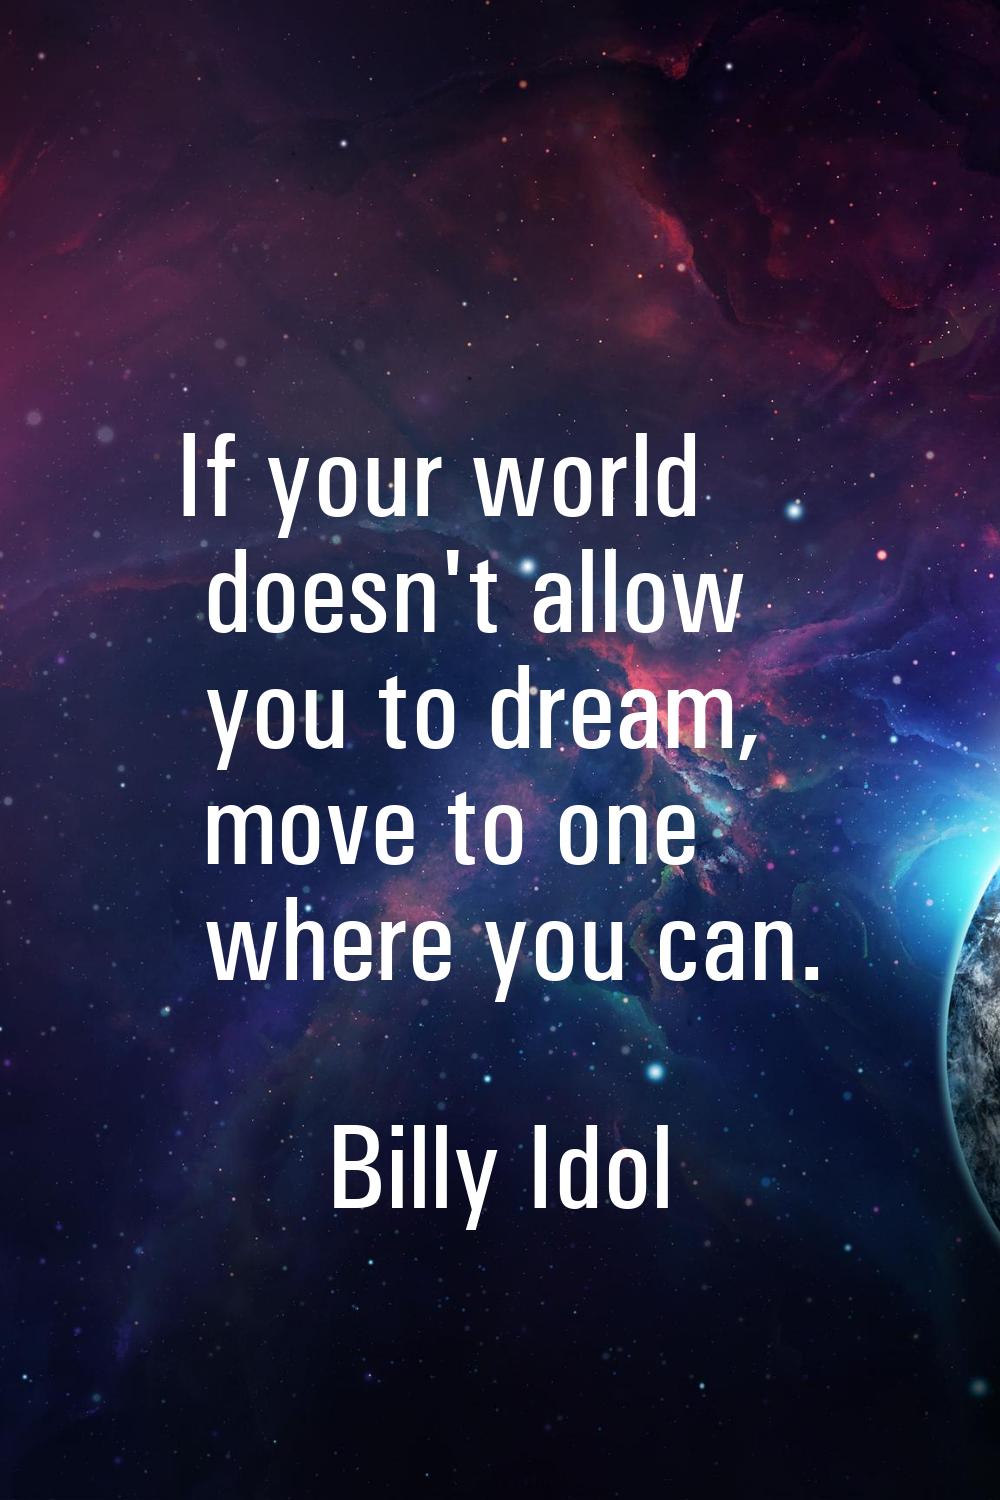 If your world doesn't allow you to dream, move to one where you can.